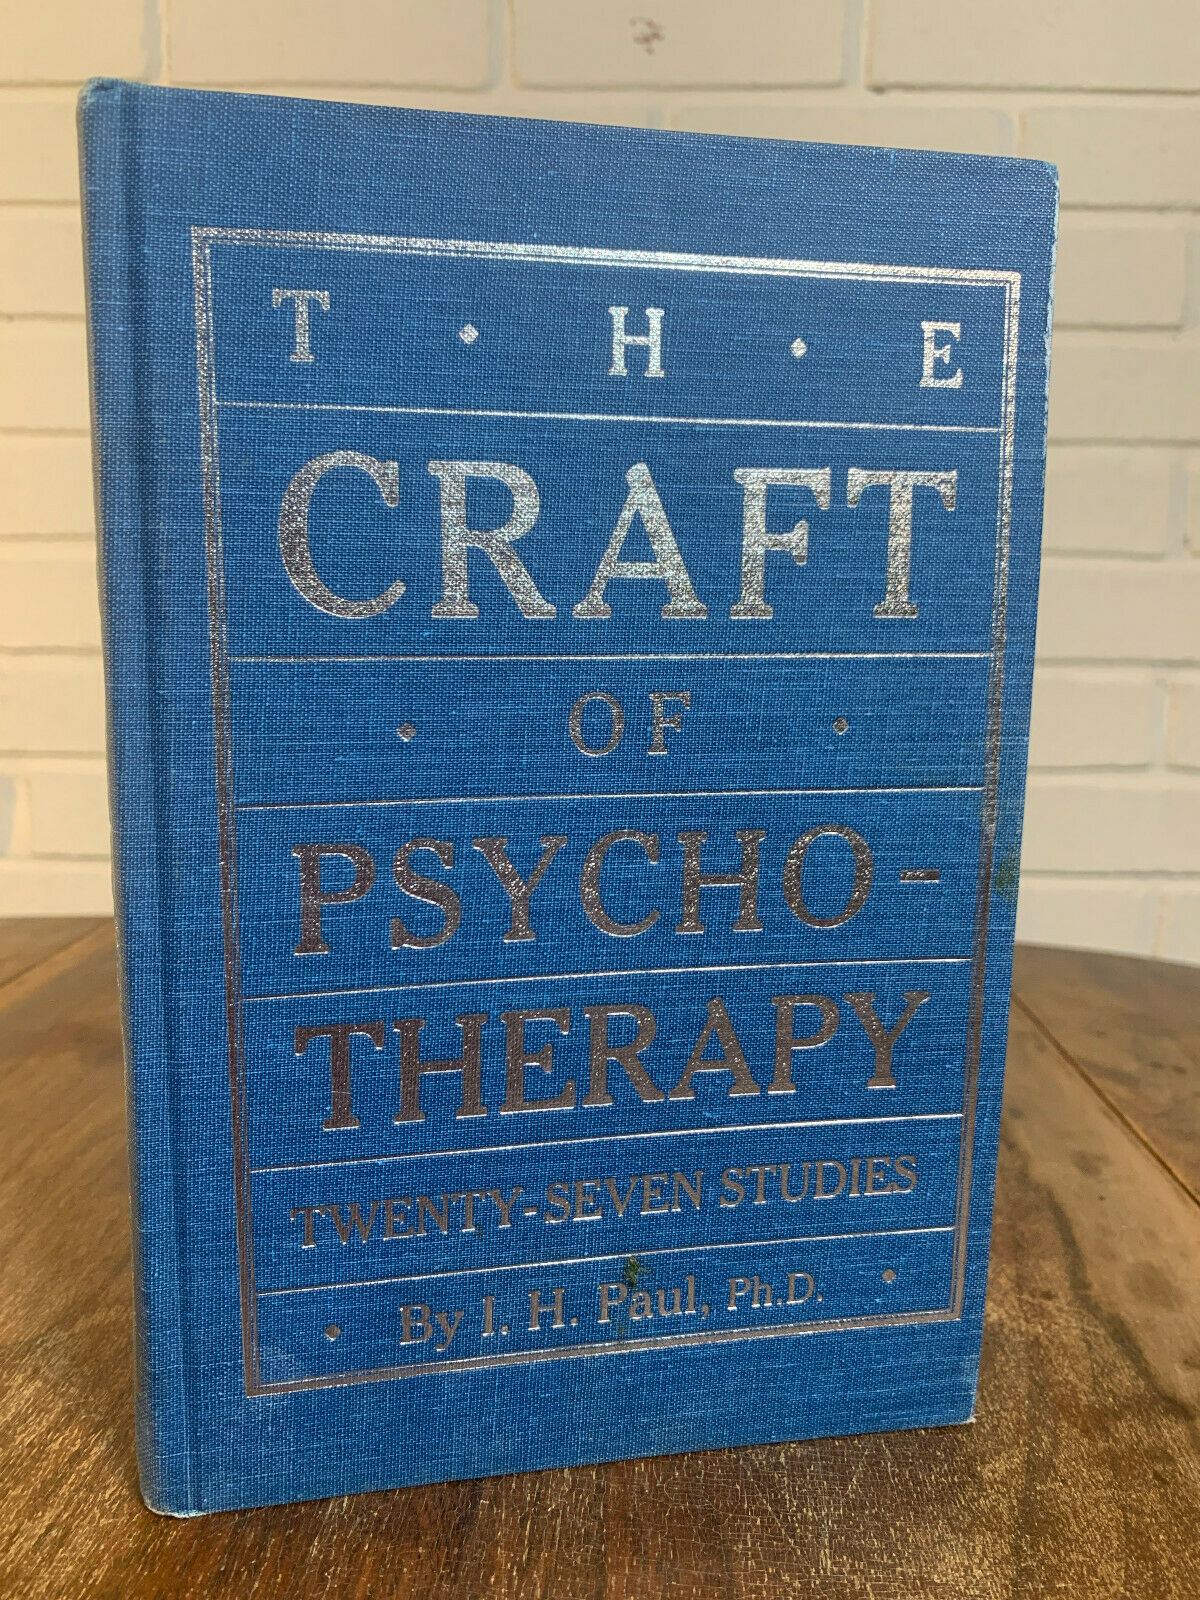 The Craft of Psychotherapy: Tweney-Seven Studies by I.H. Paul (1989) Z1